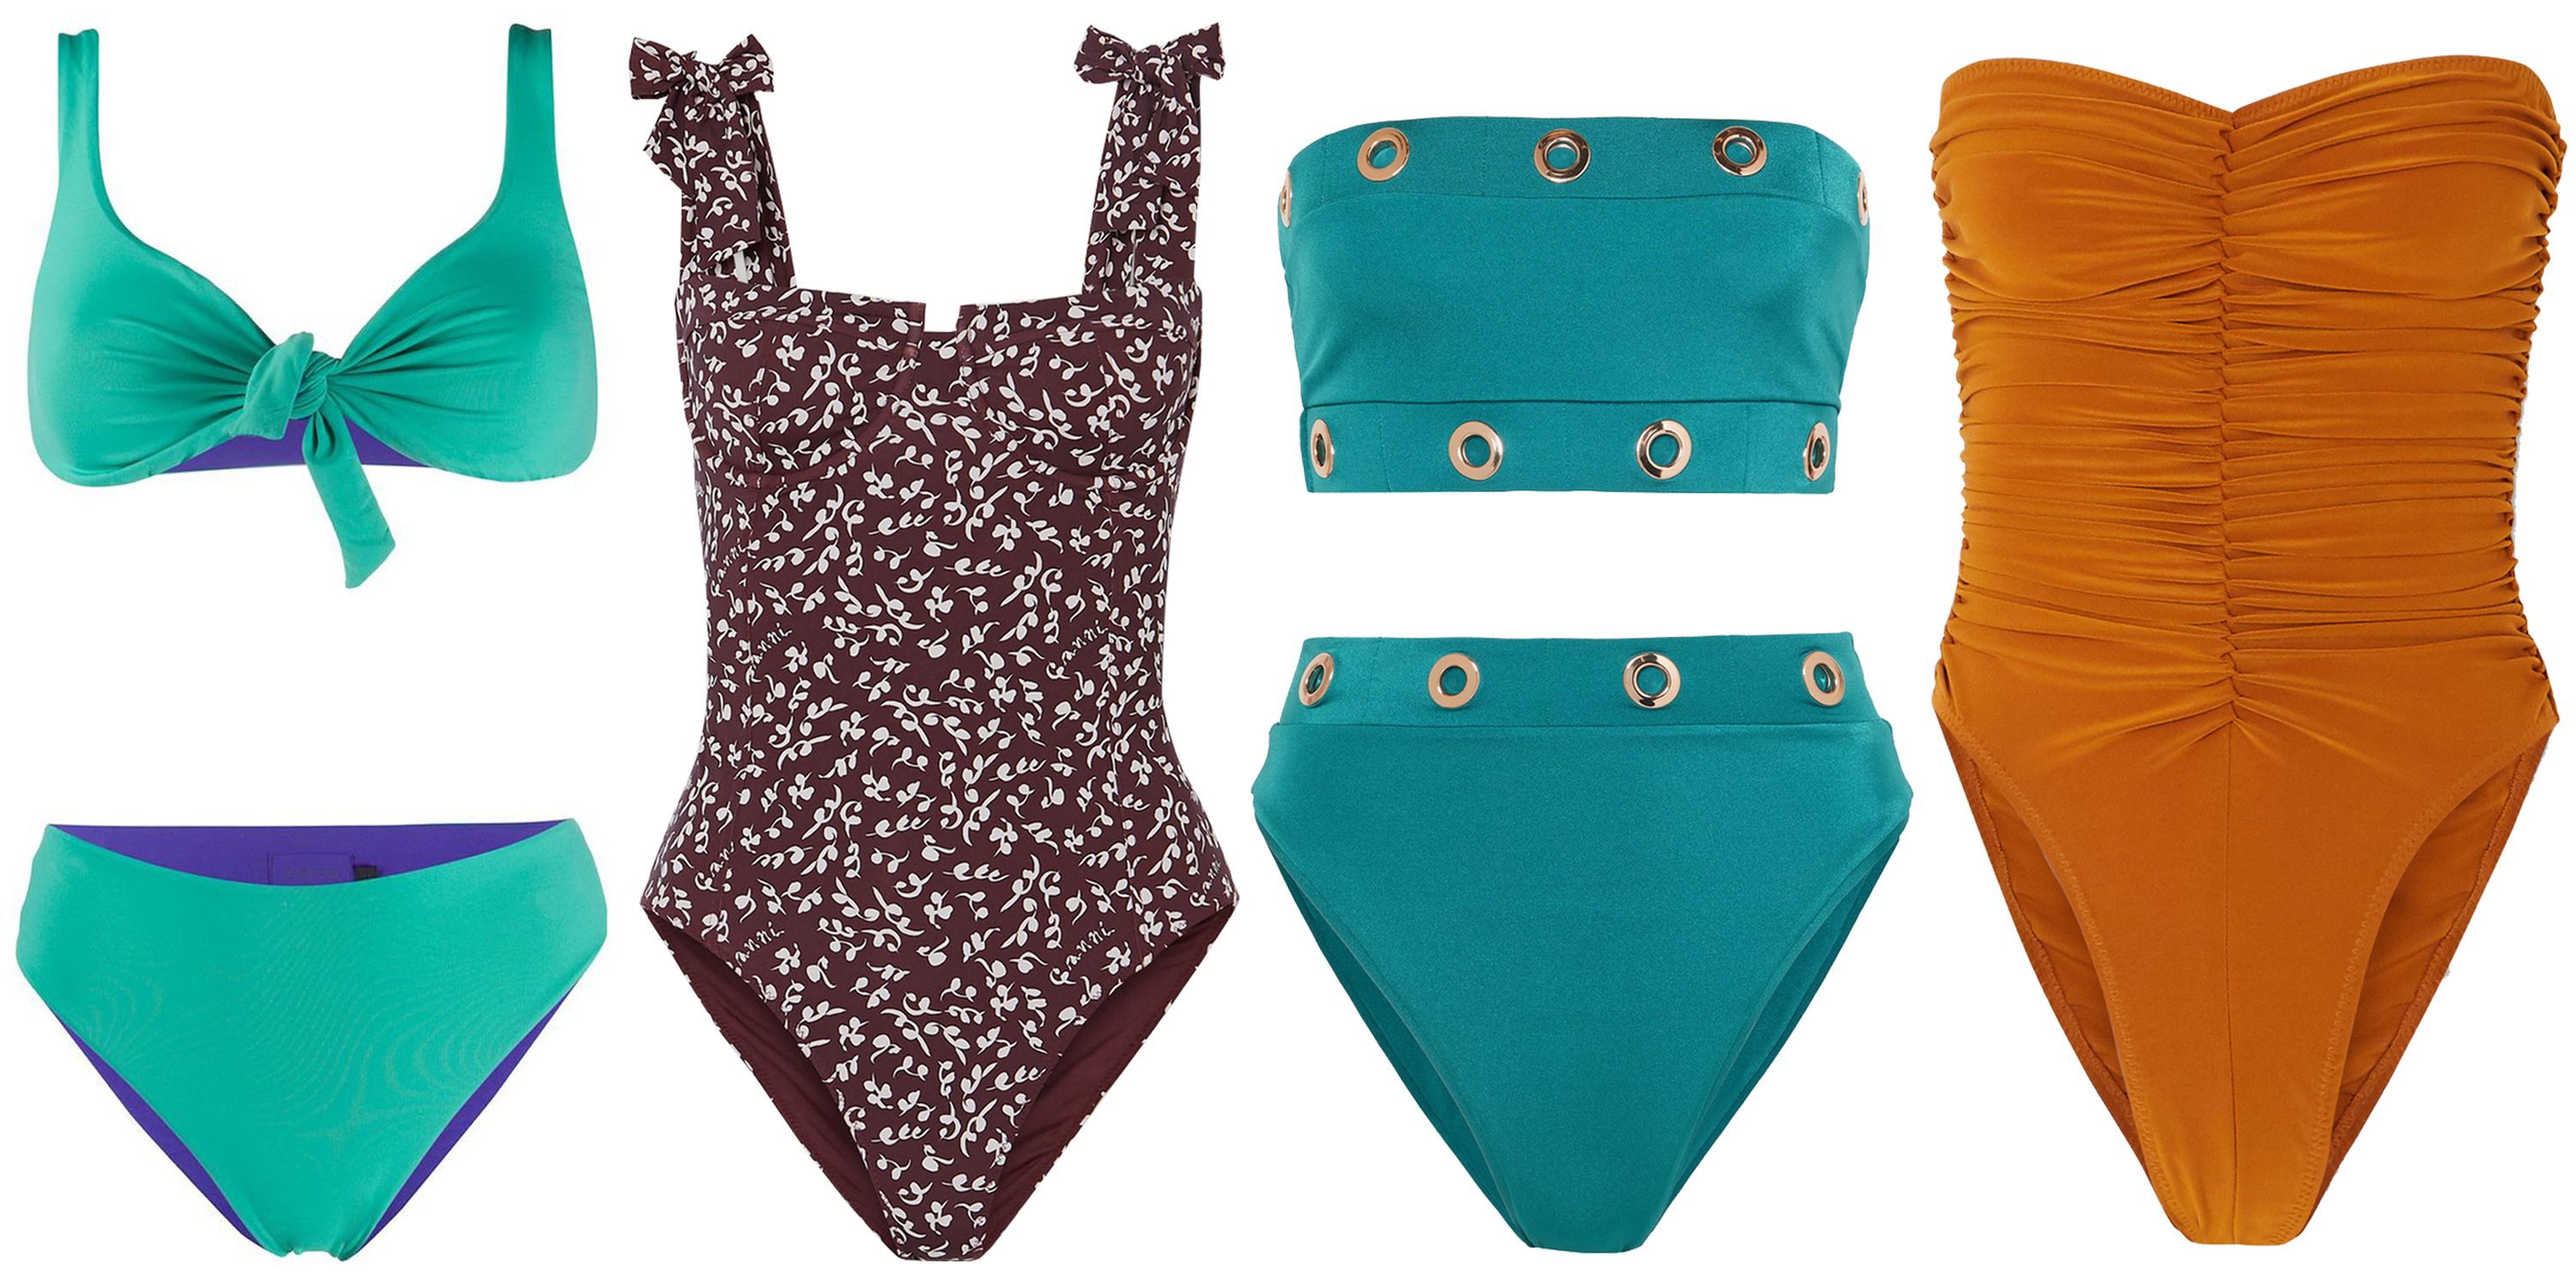 5 Best Swimsuit Trends For Summer Cute Bathing Suits For Women